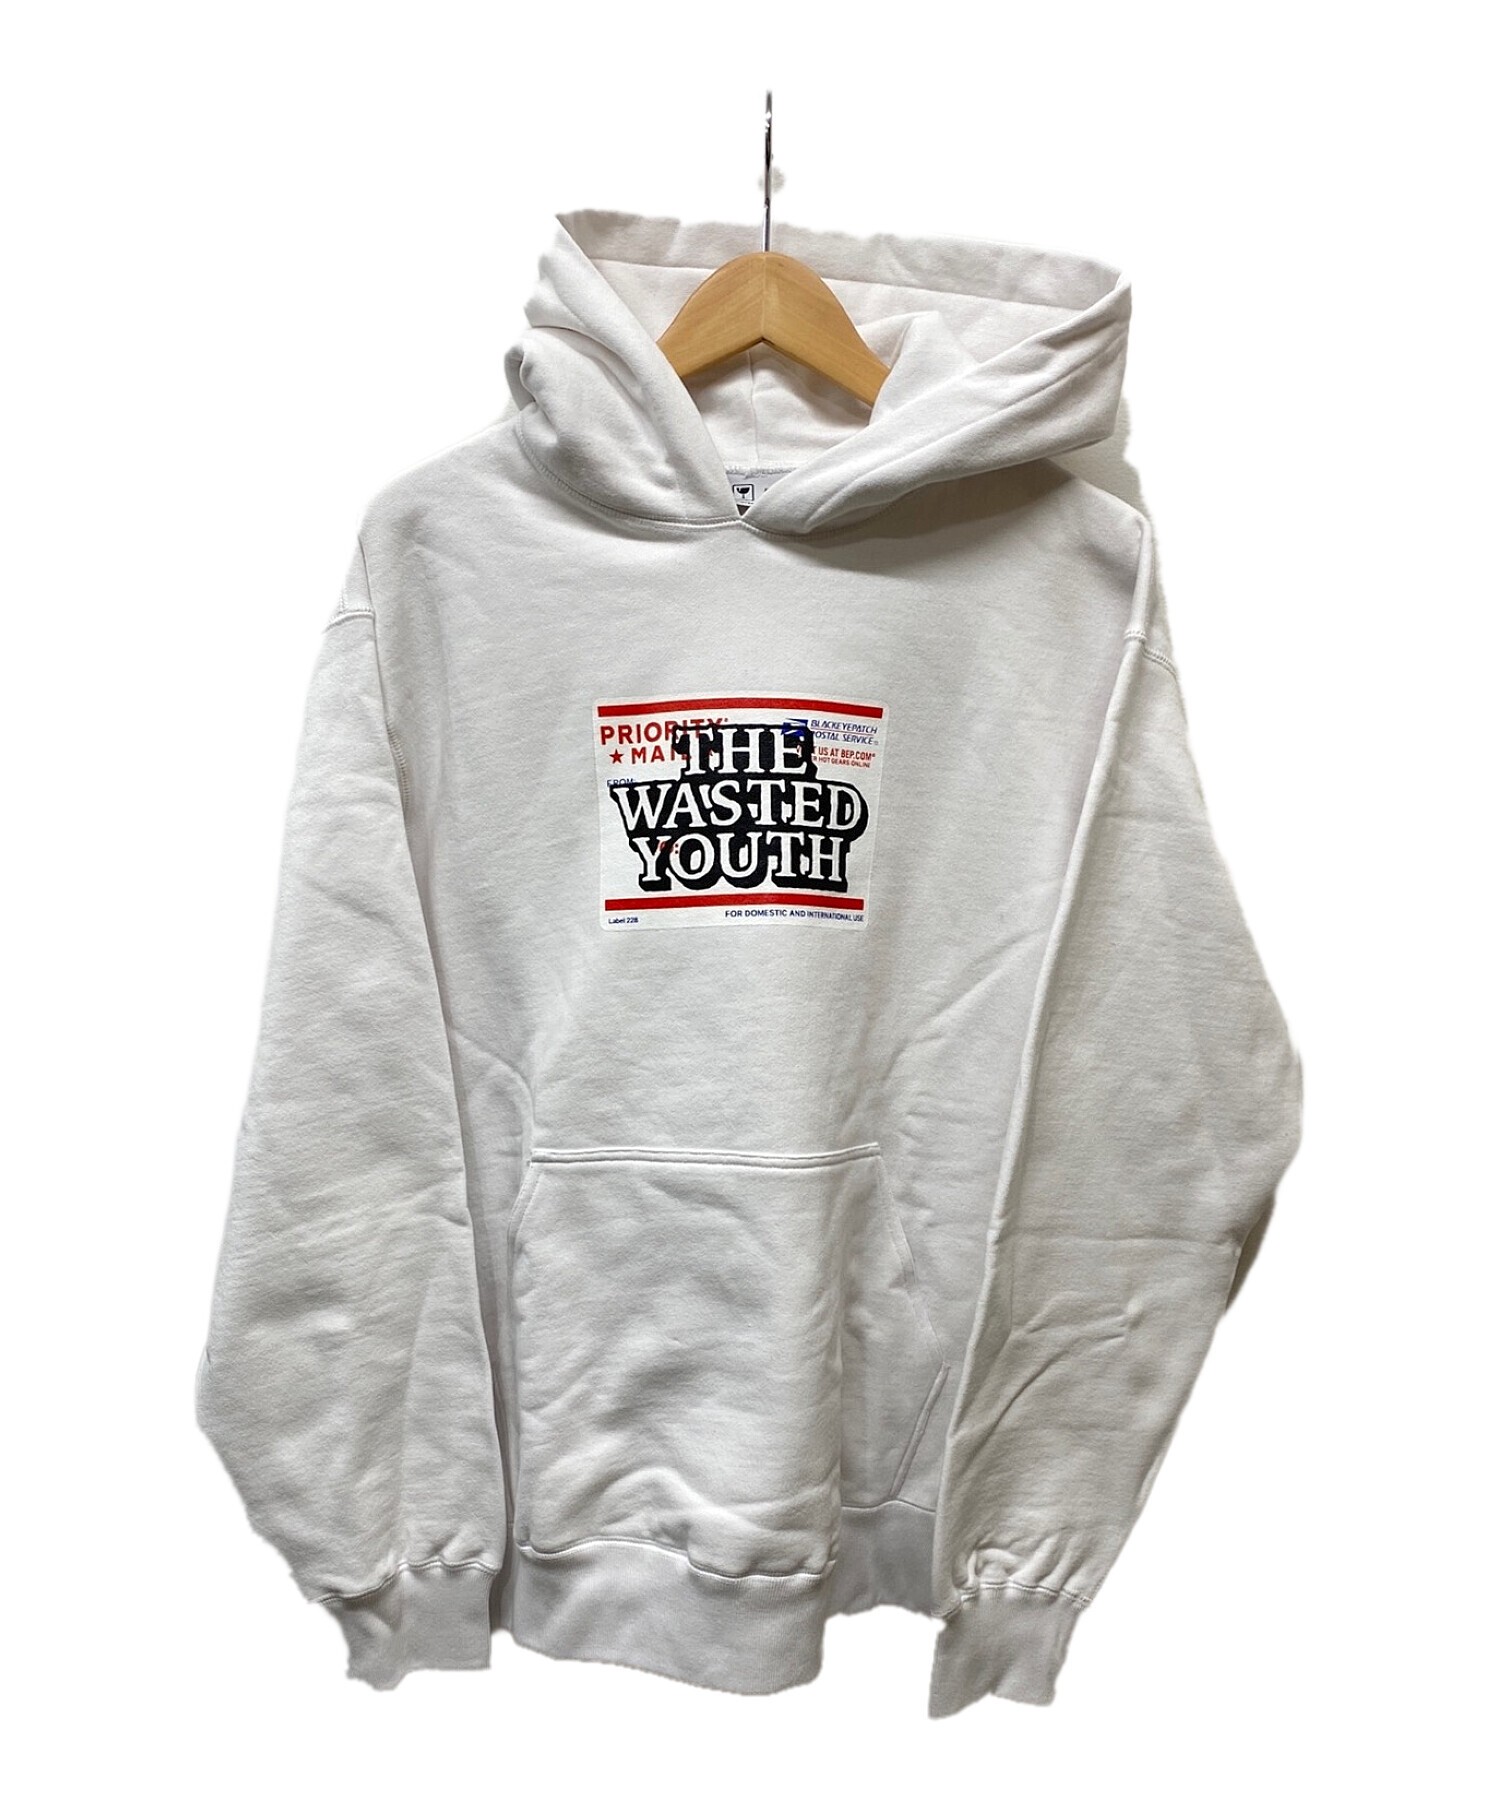 black eye patch wasted youth hoodie LS - その他